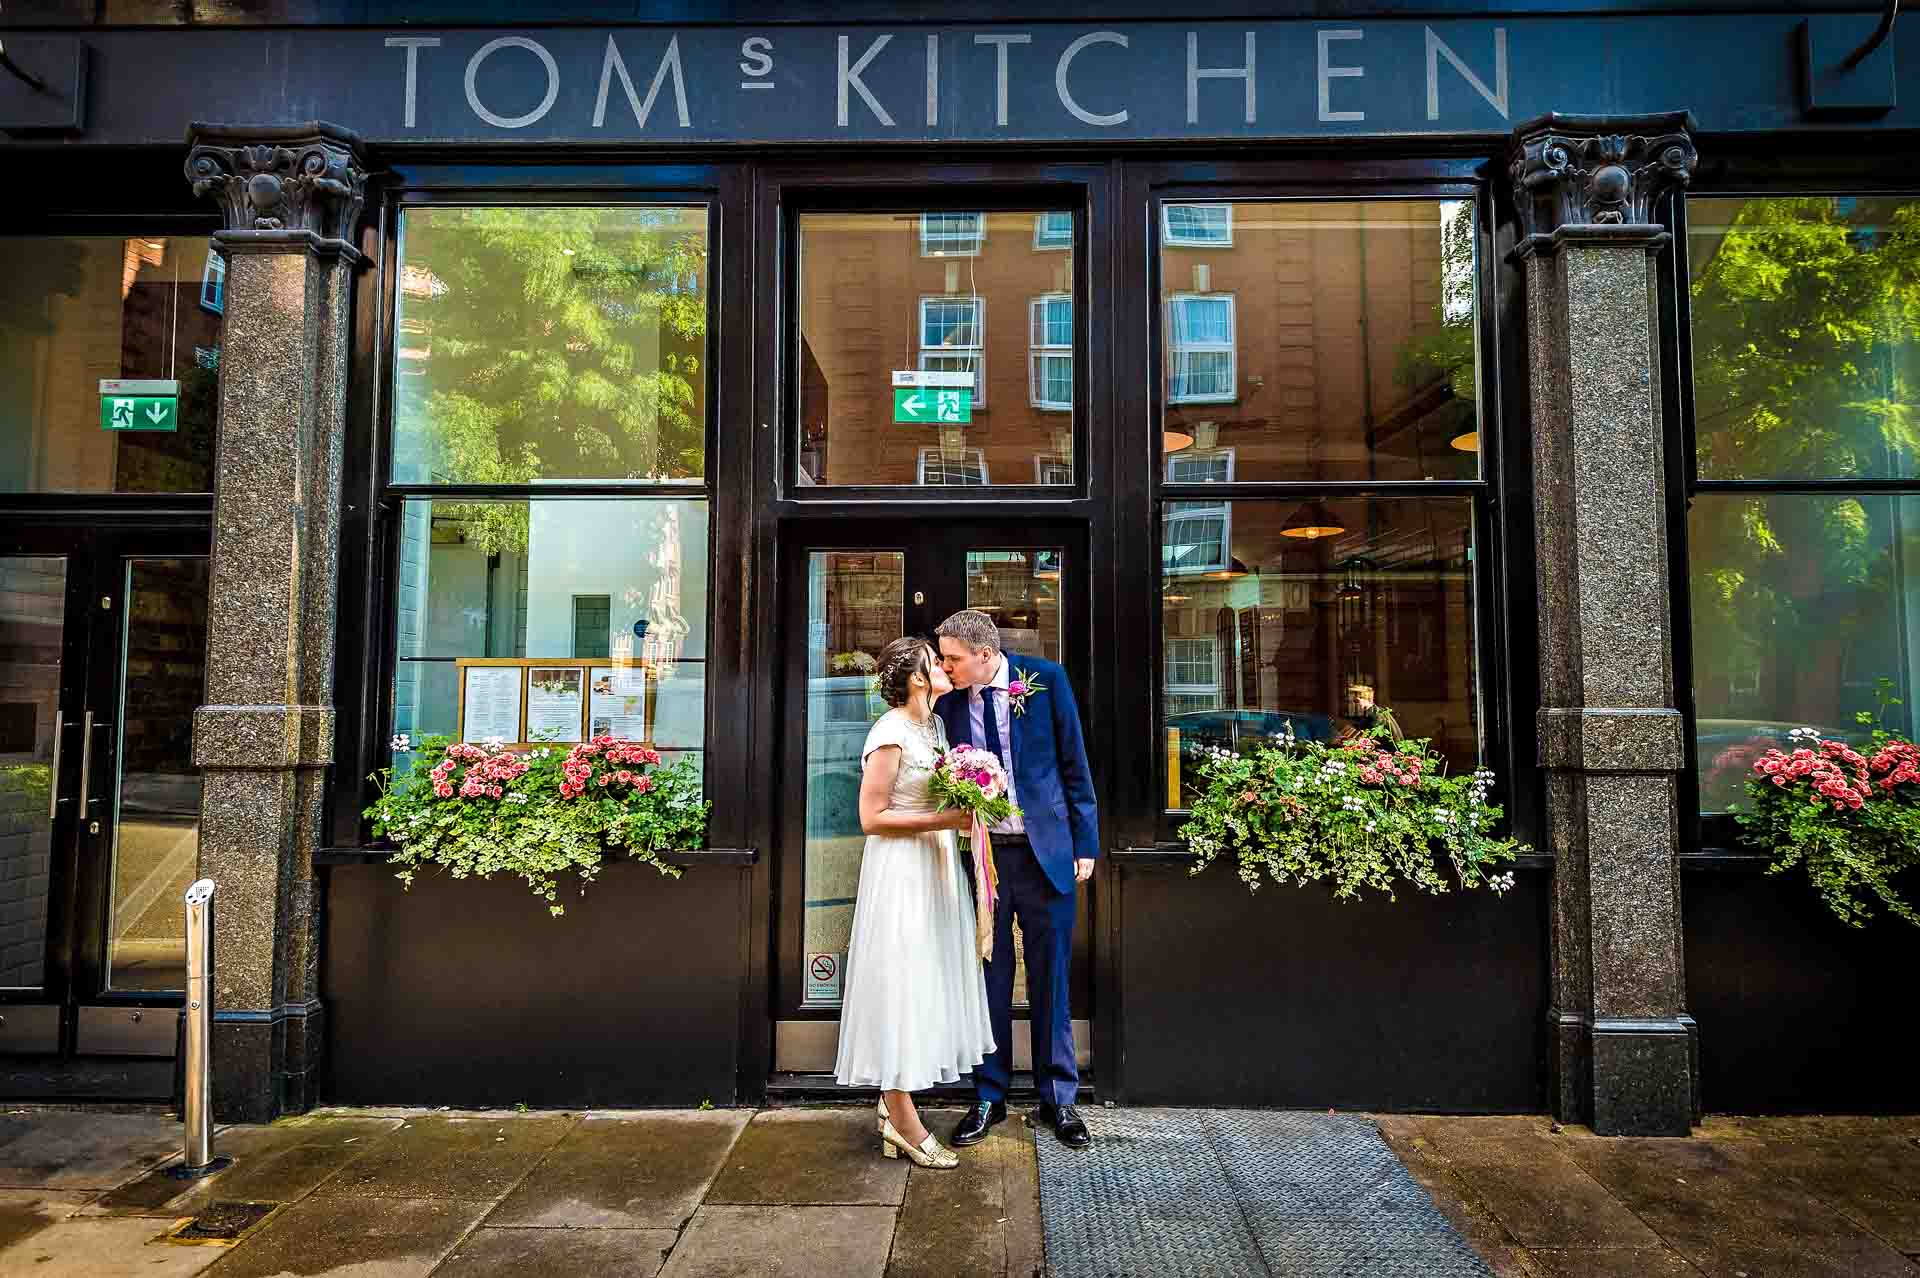 Posed Wedding Photograph Outside Tom's Kitchen in London